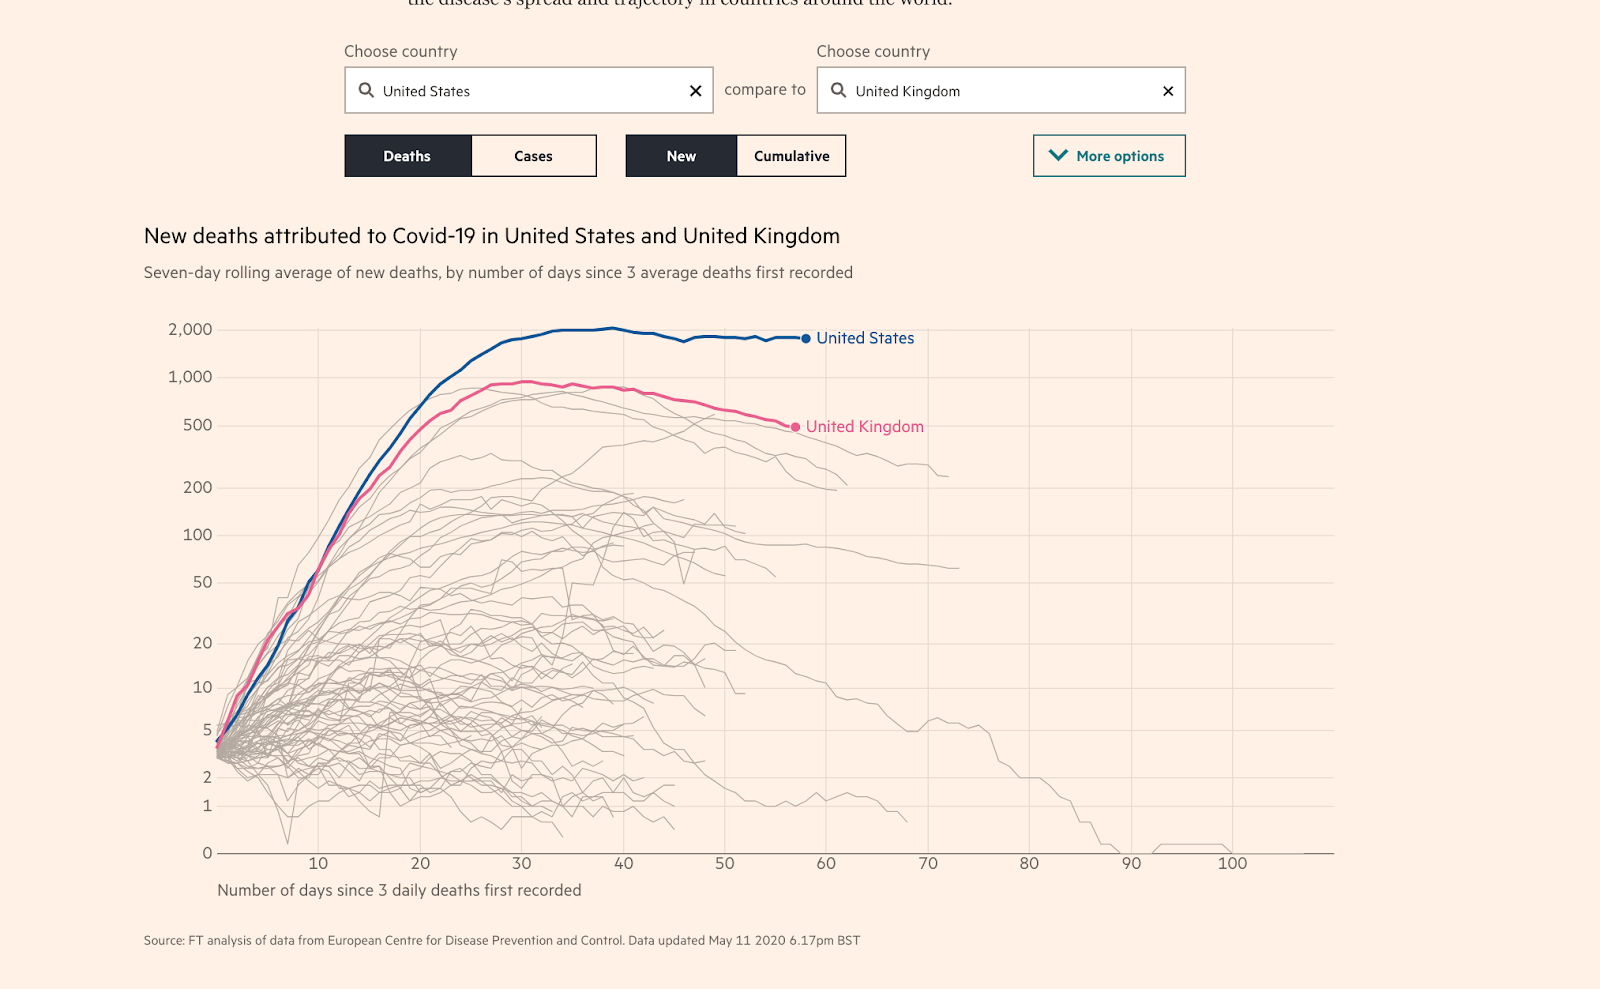 An interactive Covid-19 data visualization by the Financial Times.